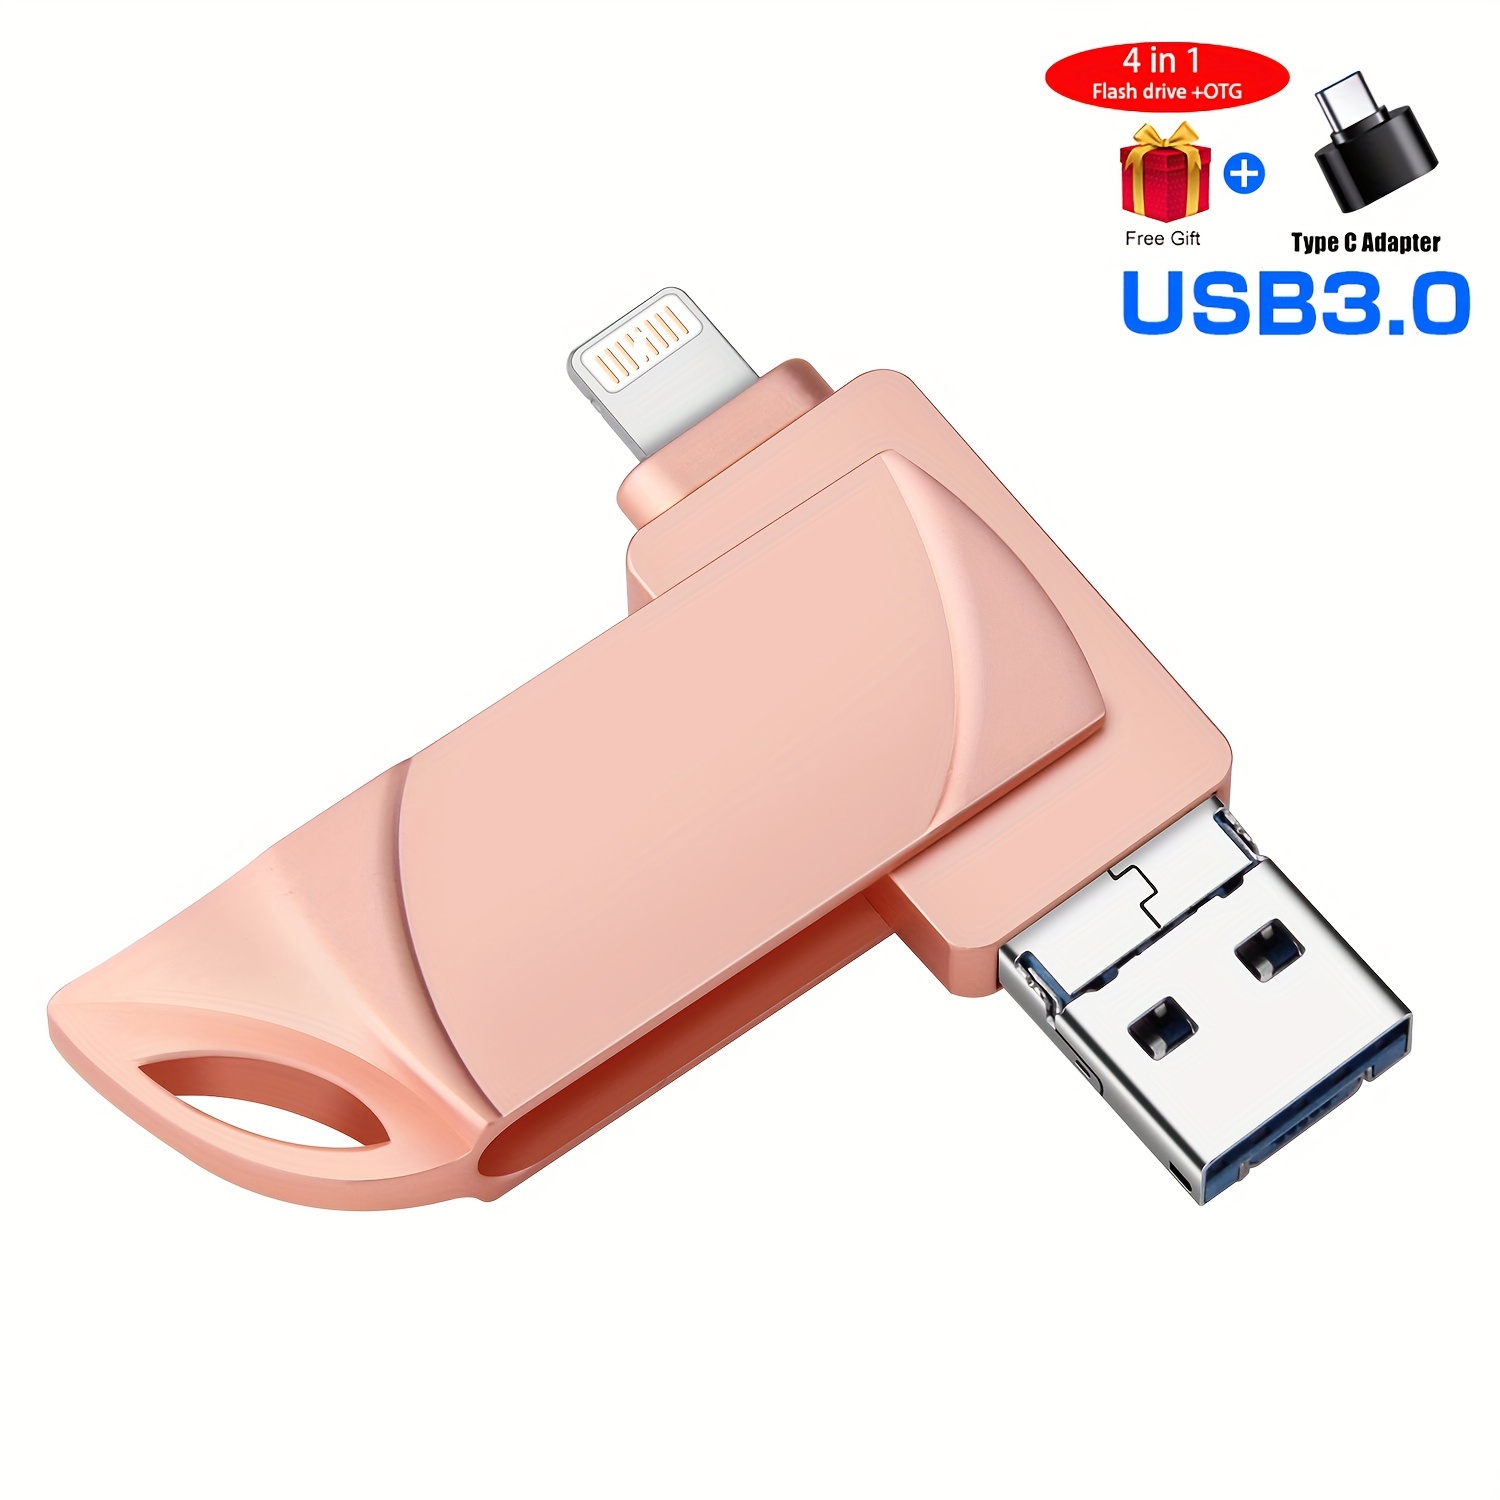 1TB 512GB USB 3.0 Flash Drive Memory Stick Type C 4in1 For iPhone